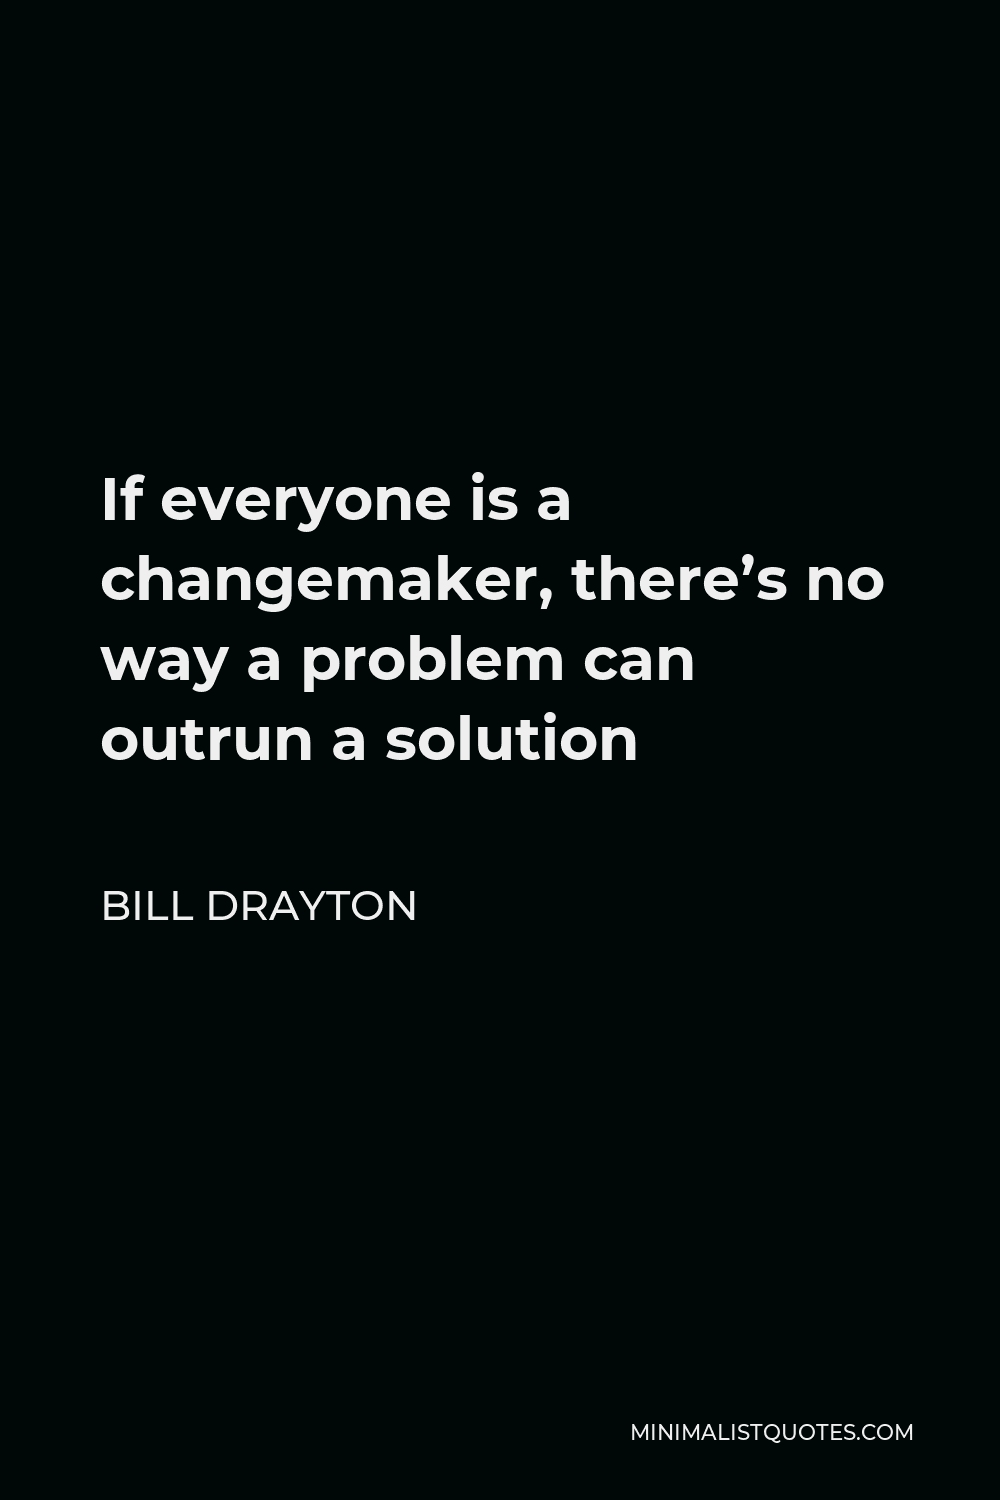 Bill Drayton Quote - If everyone is a changemaker, there’s no way a problem can outrun a solution